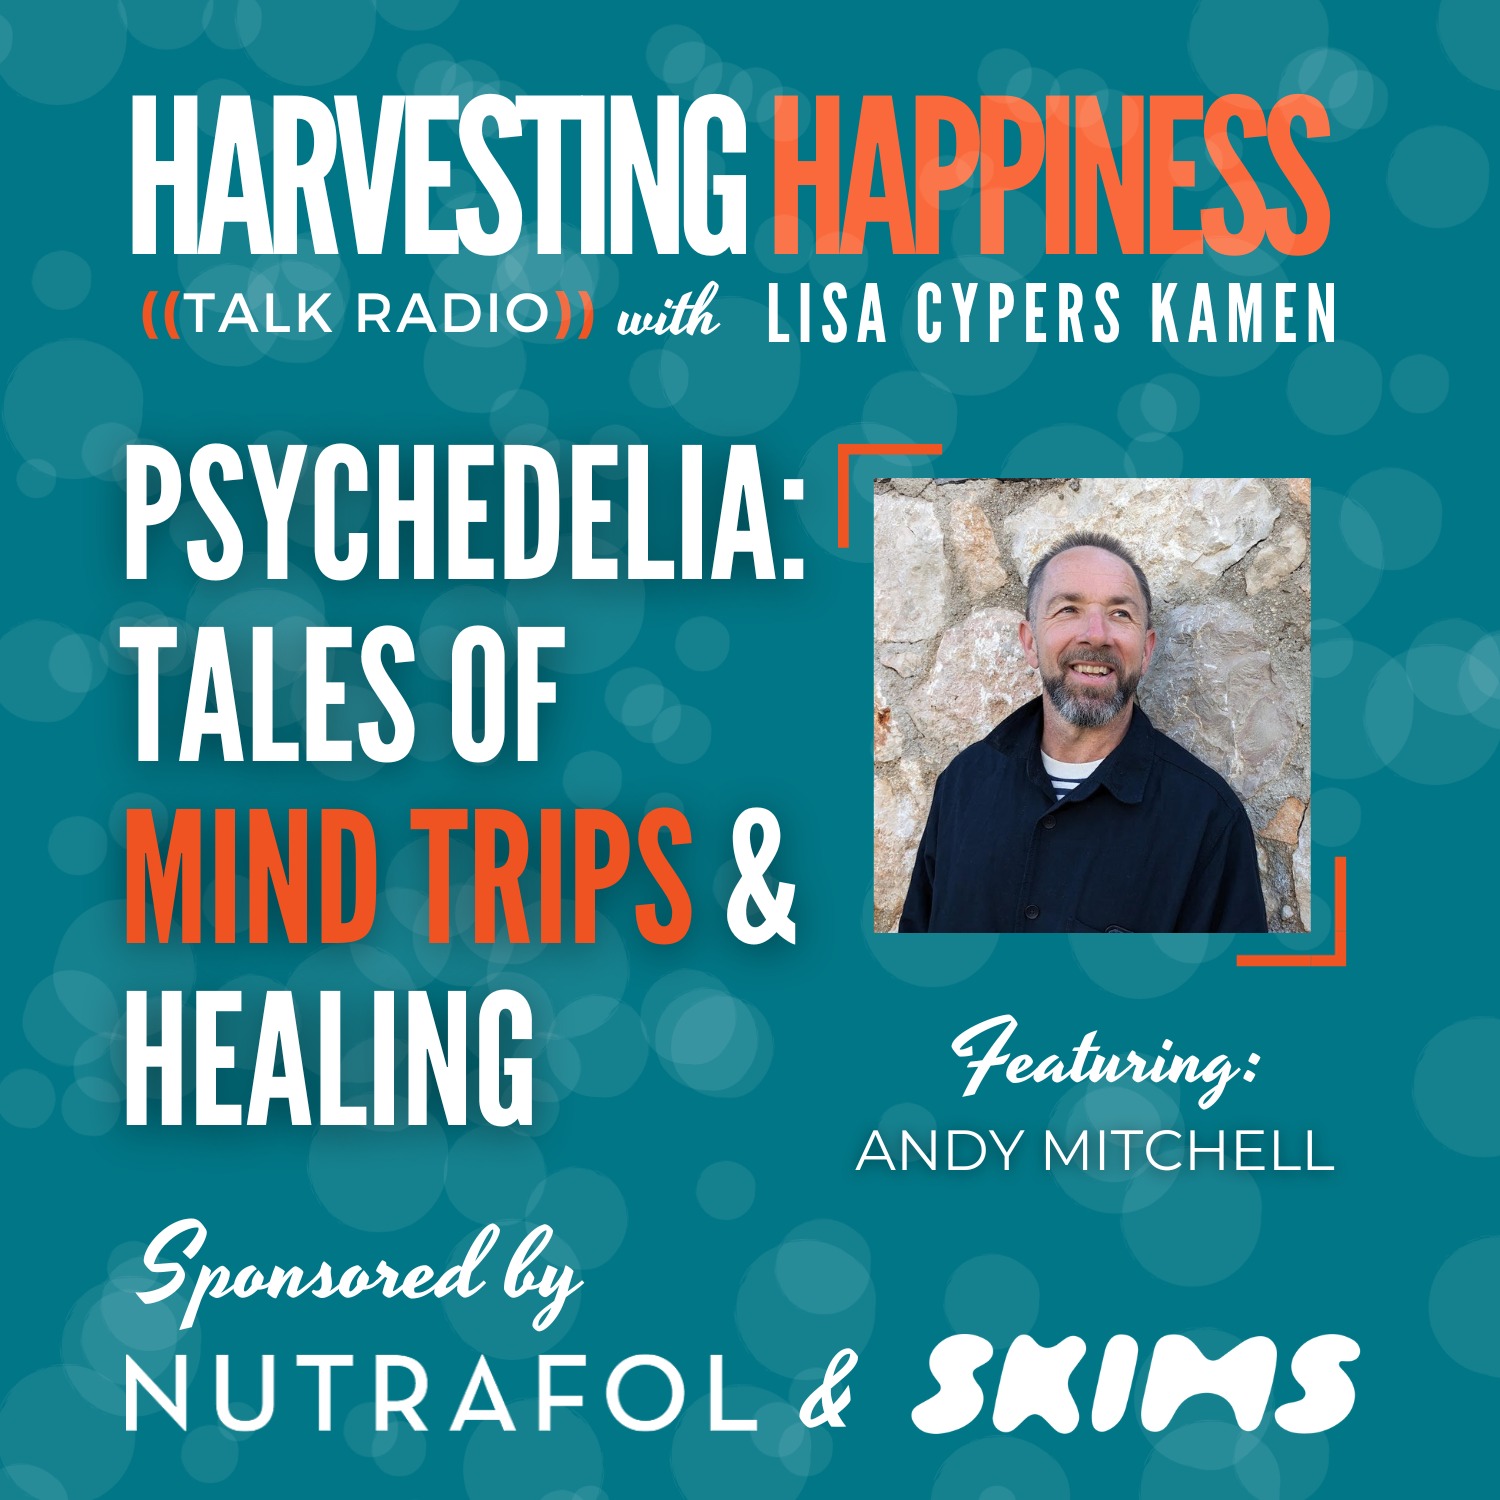 Psychedelia: Tales of Mind Trips & Healing with Andy Mitchell